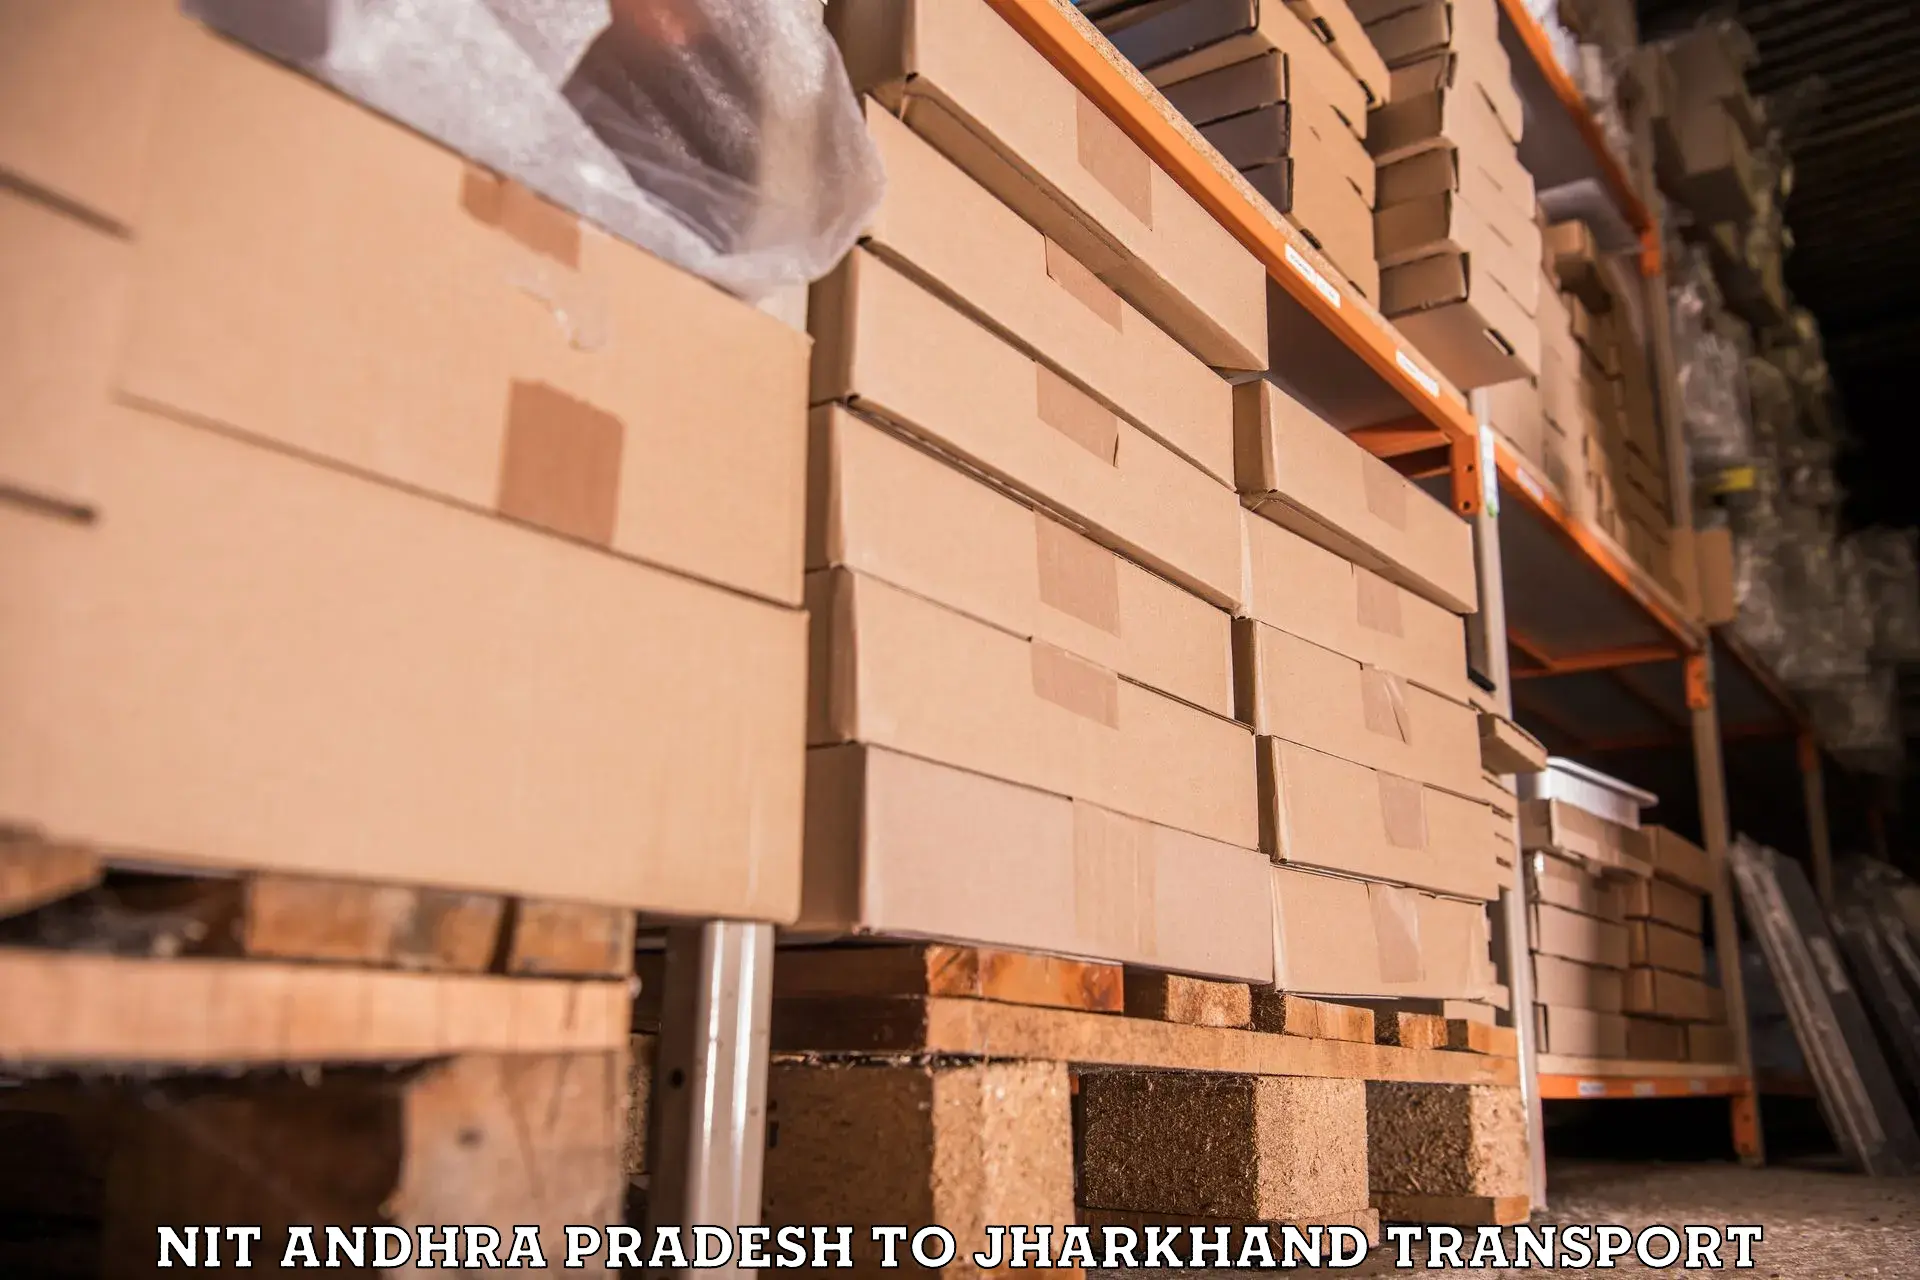 Daily parcel service transport NIT Andhra Pradesh to Jharkhand